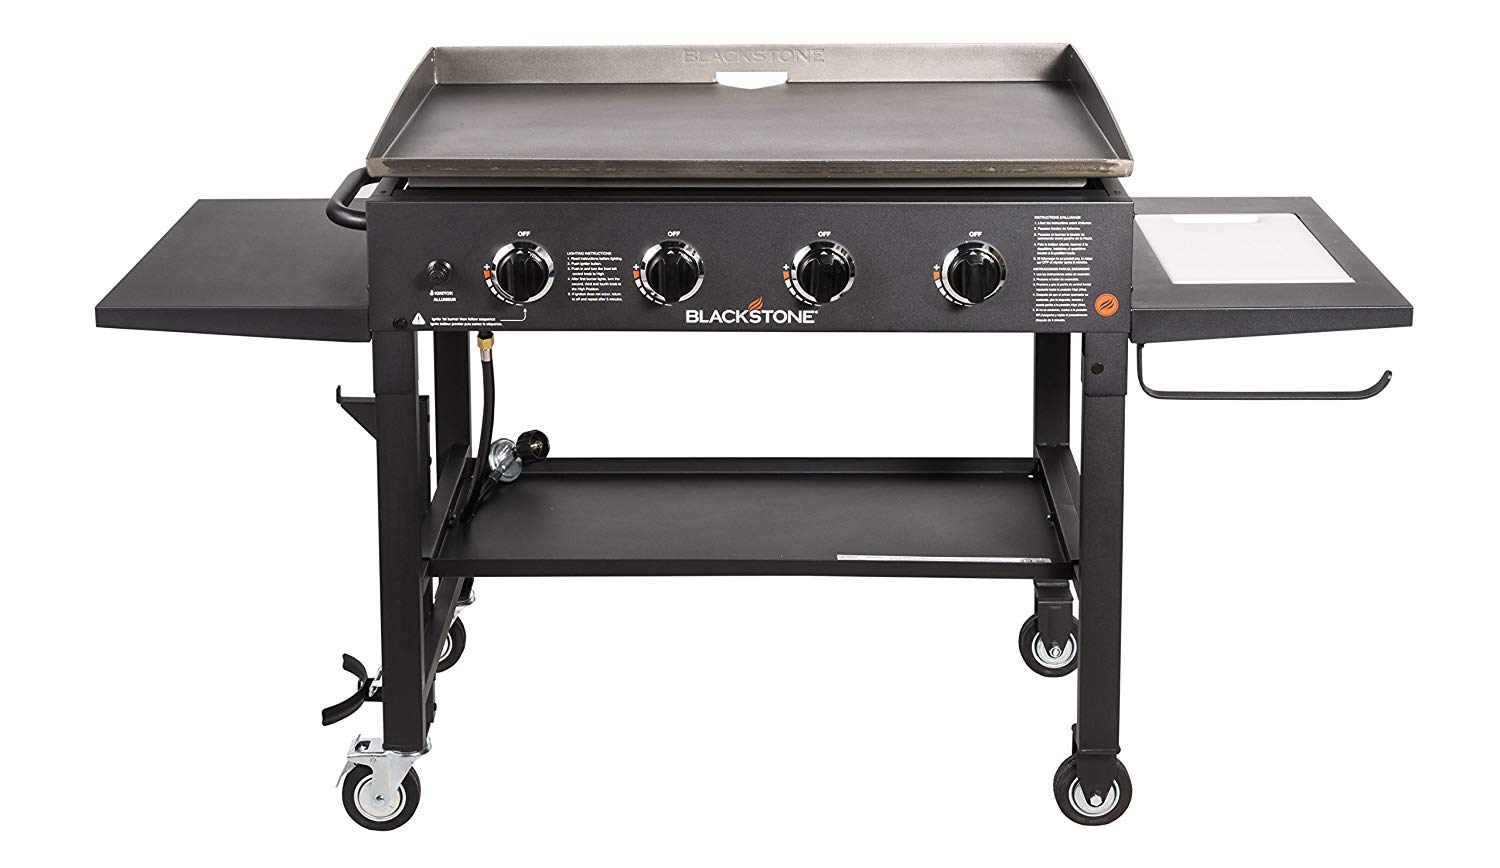 Review of Blackstone 36 inch Outdoor Flat Top Gas Grill Griddle Station